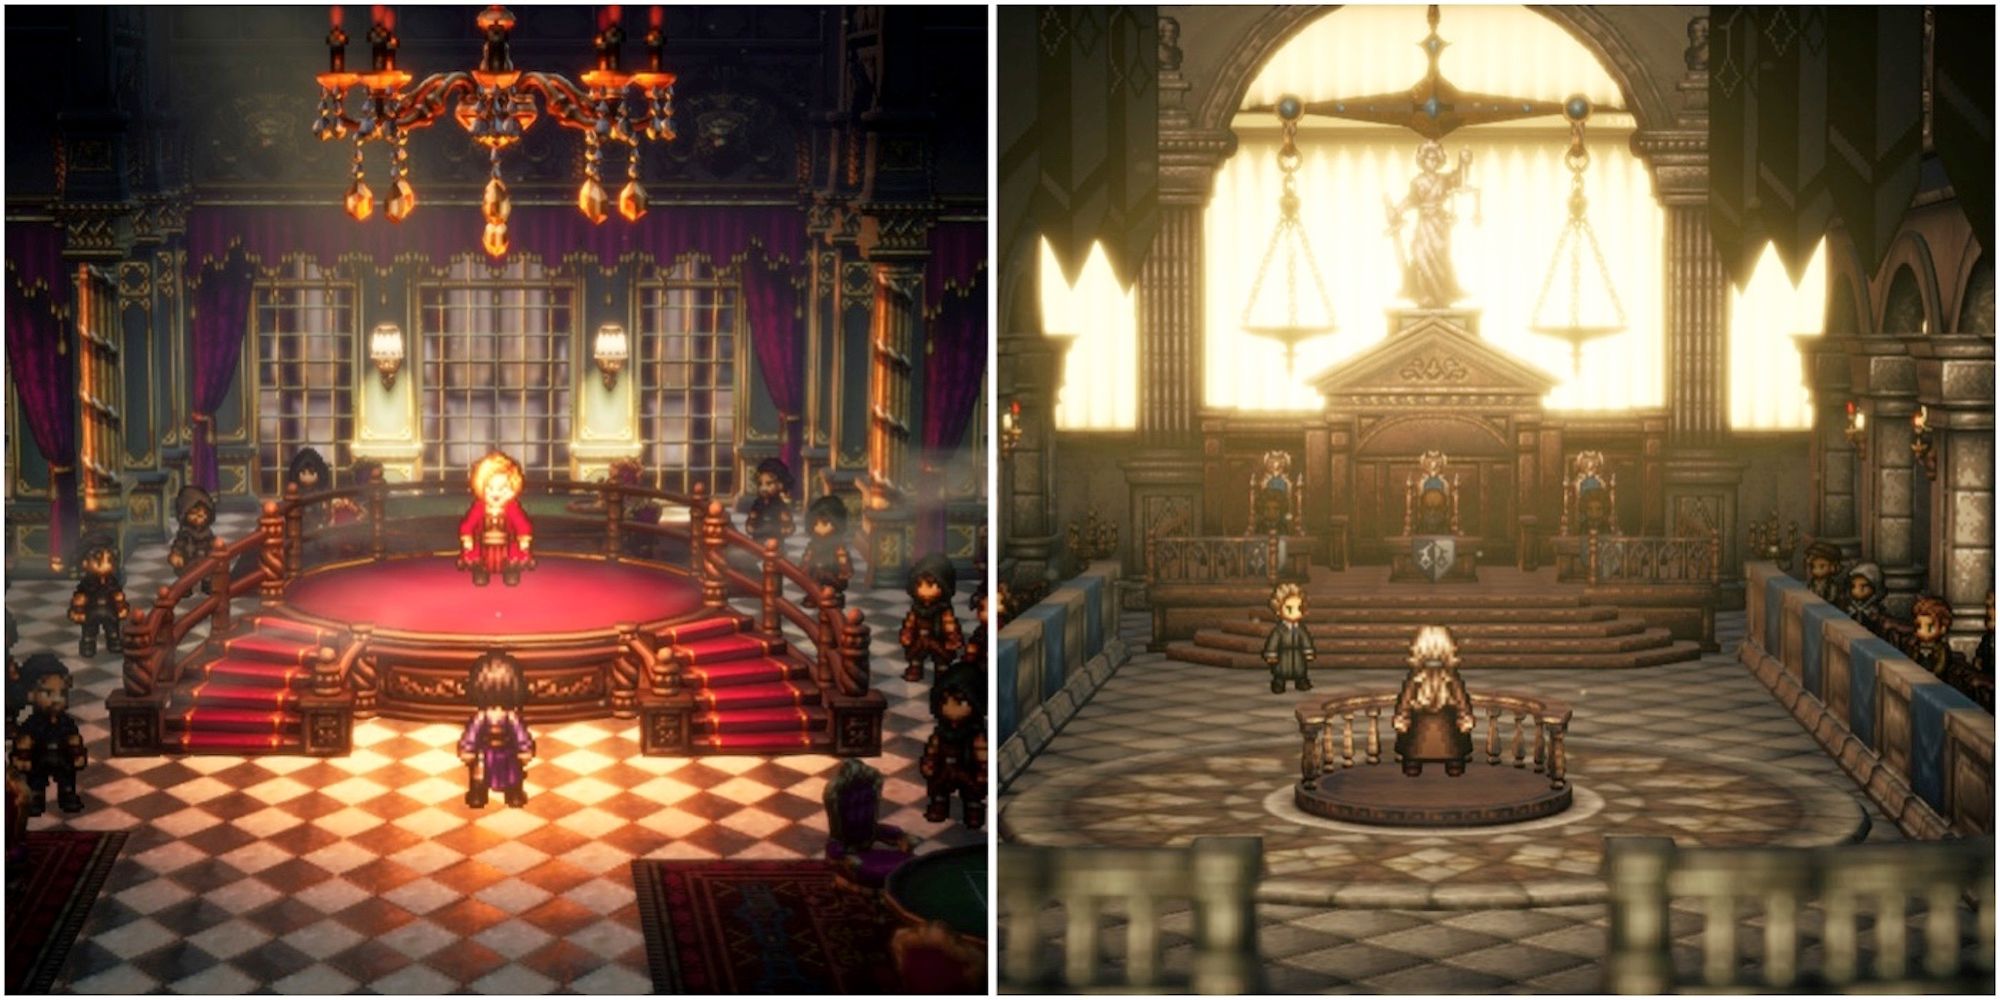 Cutscenes featuring characters in Octopath Traveler 2 